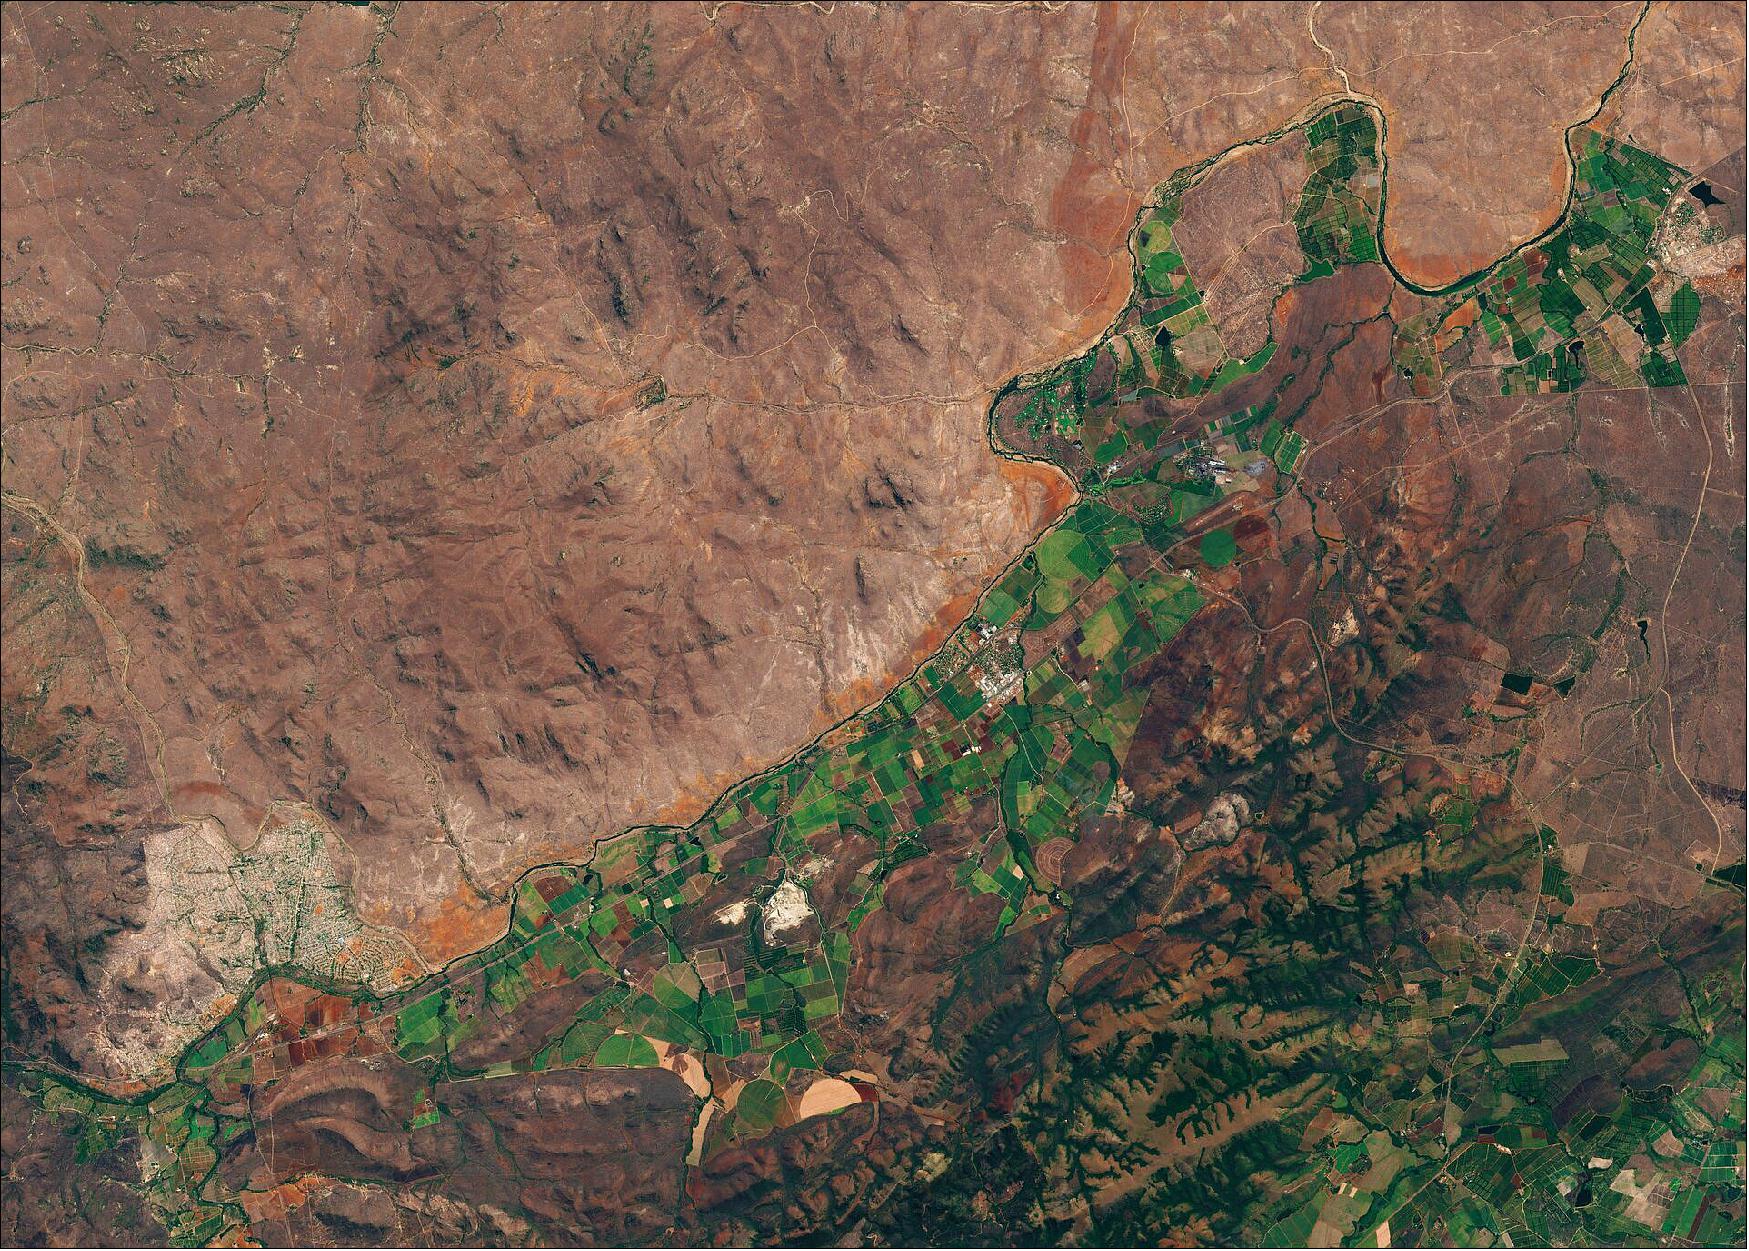 Figure 64: Farms along Crocodile River. Captured by the Copernicus Sentinel-2 mission, this image shows farms next to the Crocodile River in Mpumalanga Province, South Africa. Farmers growing sugar cane and fresh fruit take water from the river to irrigate their crops, leaving less for those people living downstream. In response to severe water shortages, the South African government passed the National Water Act of 1998, which is intended to restrict the amount of water farmers use for irrigation (image credit: ESA, the image contains modified Copernicus Sentinel data (2018), processed by ESA, CC BY-SA 3.0 IGO)